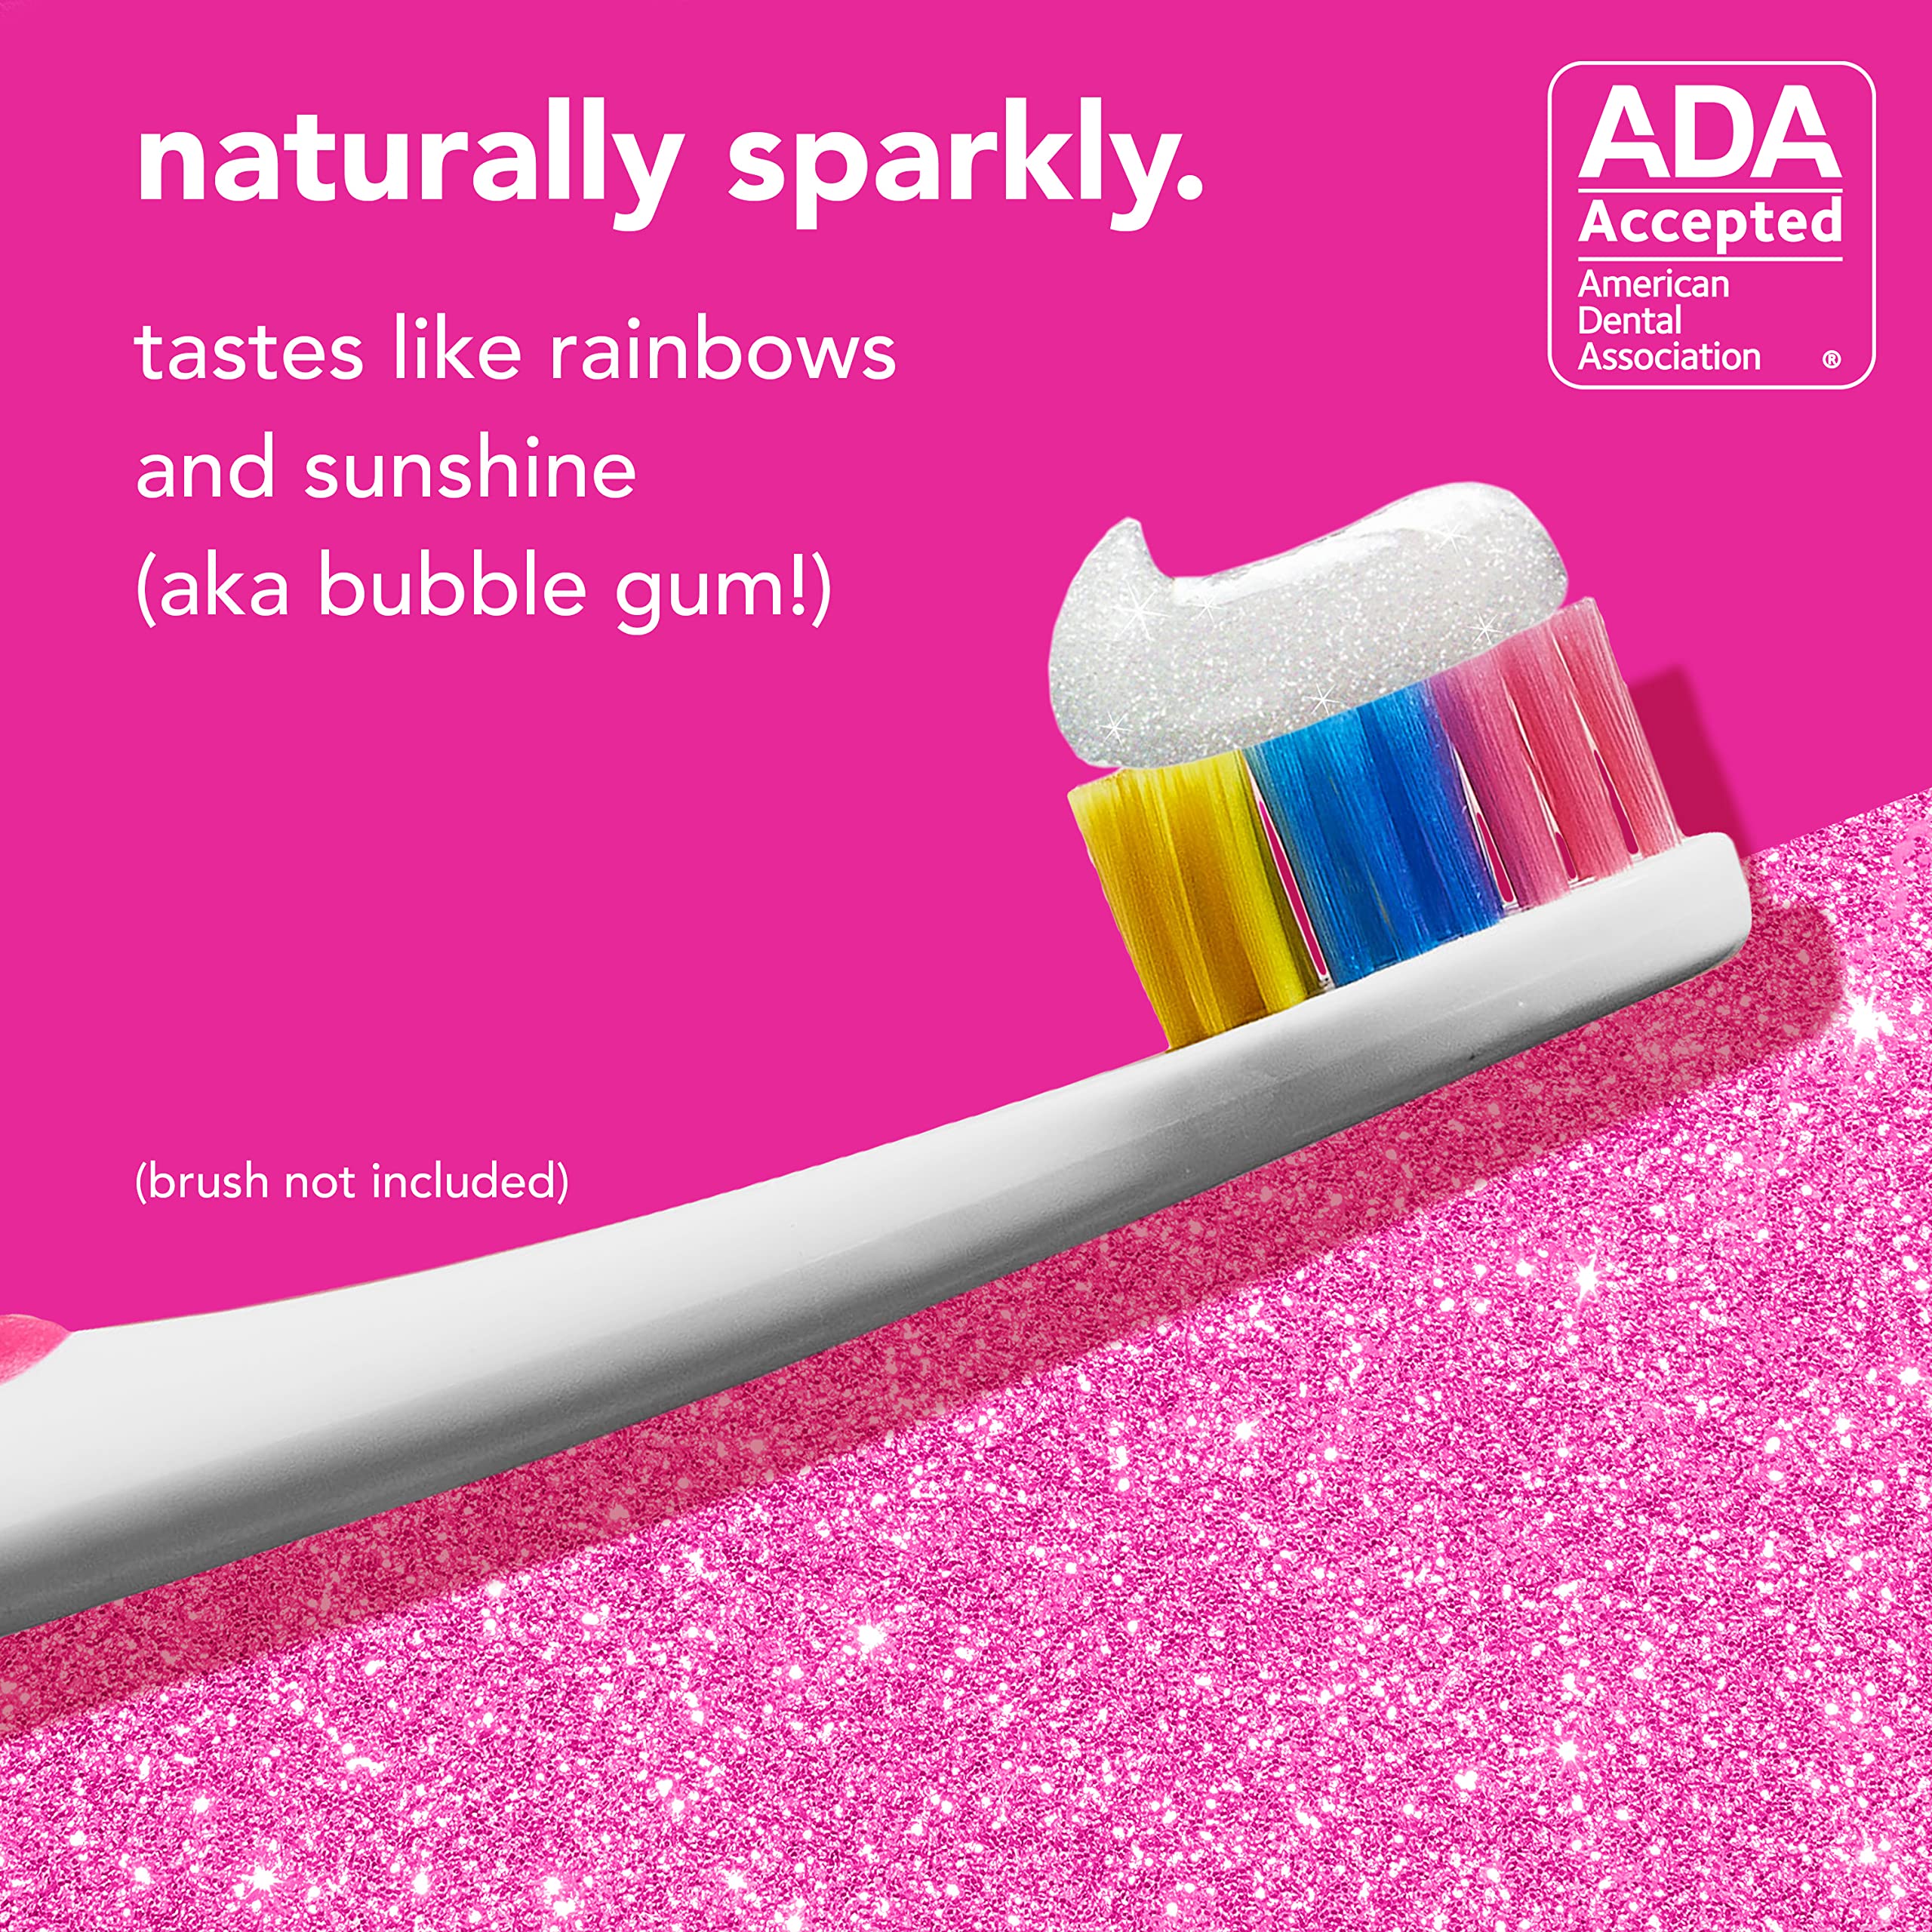 hello Unicorn Sparkle Kids Fluoride Toothpaste, Natural Bubble Gum Flavor, ADA Approved, Ages 2+, No Artificial Sweeteners, No SLS, Gluten Free, Vegan, Pack of 3, 4.2 oz Tubes